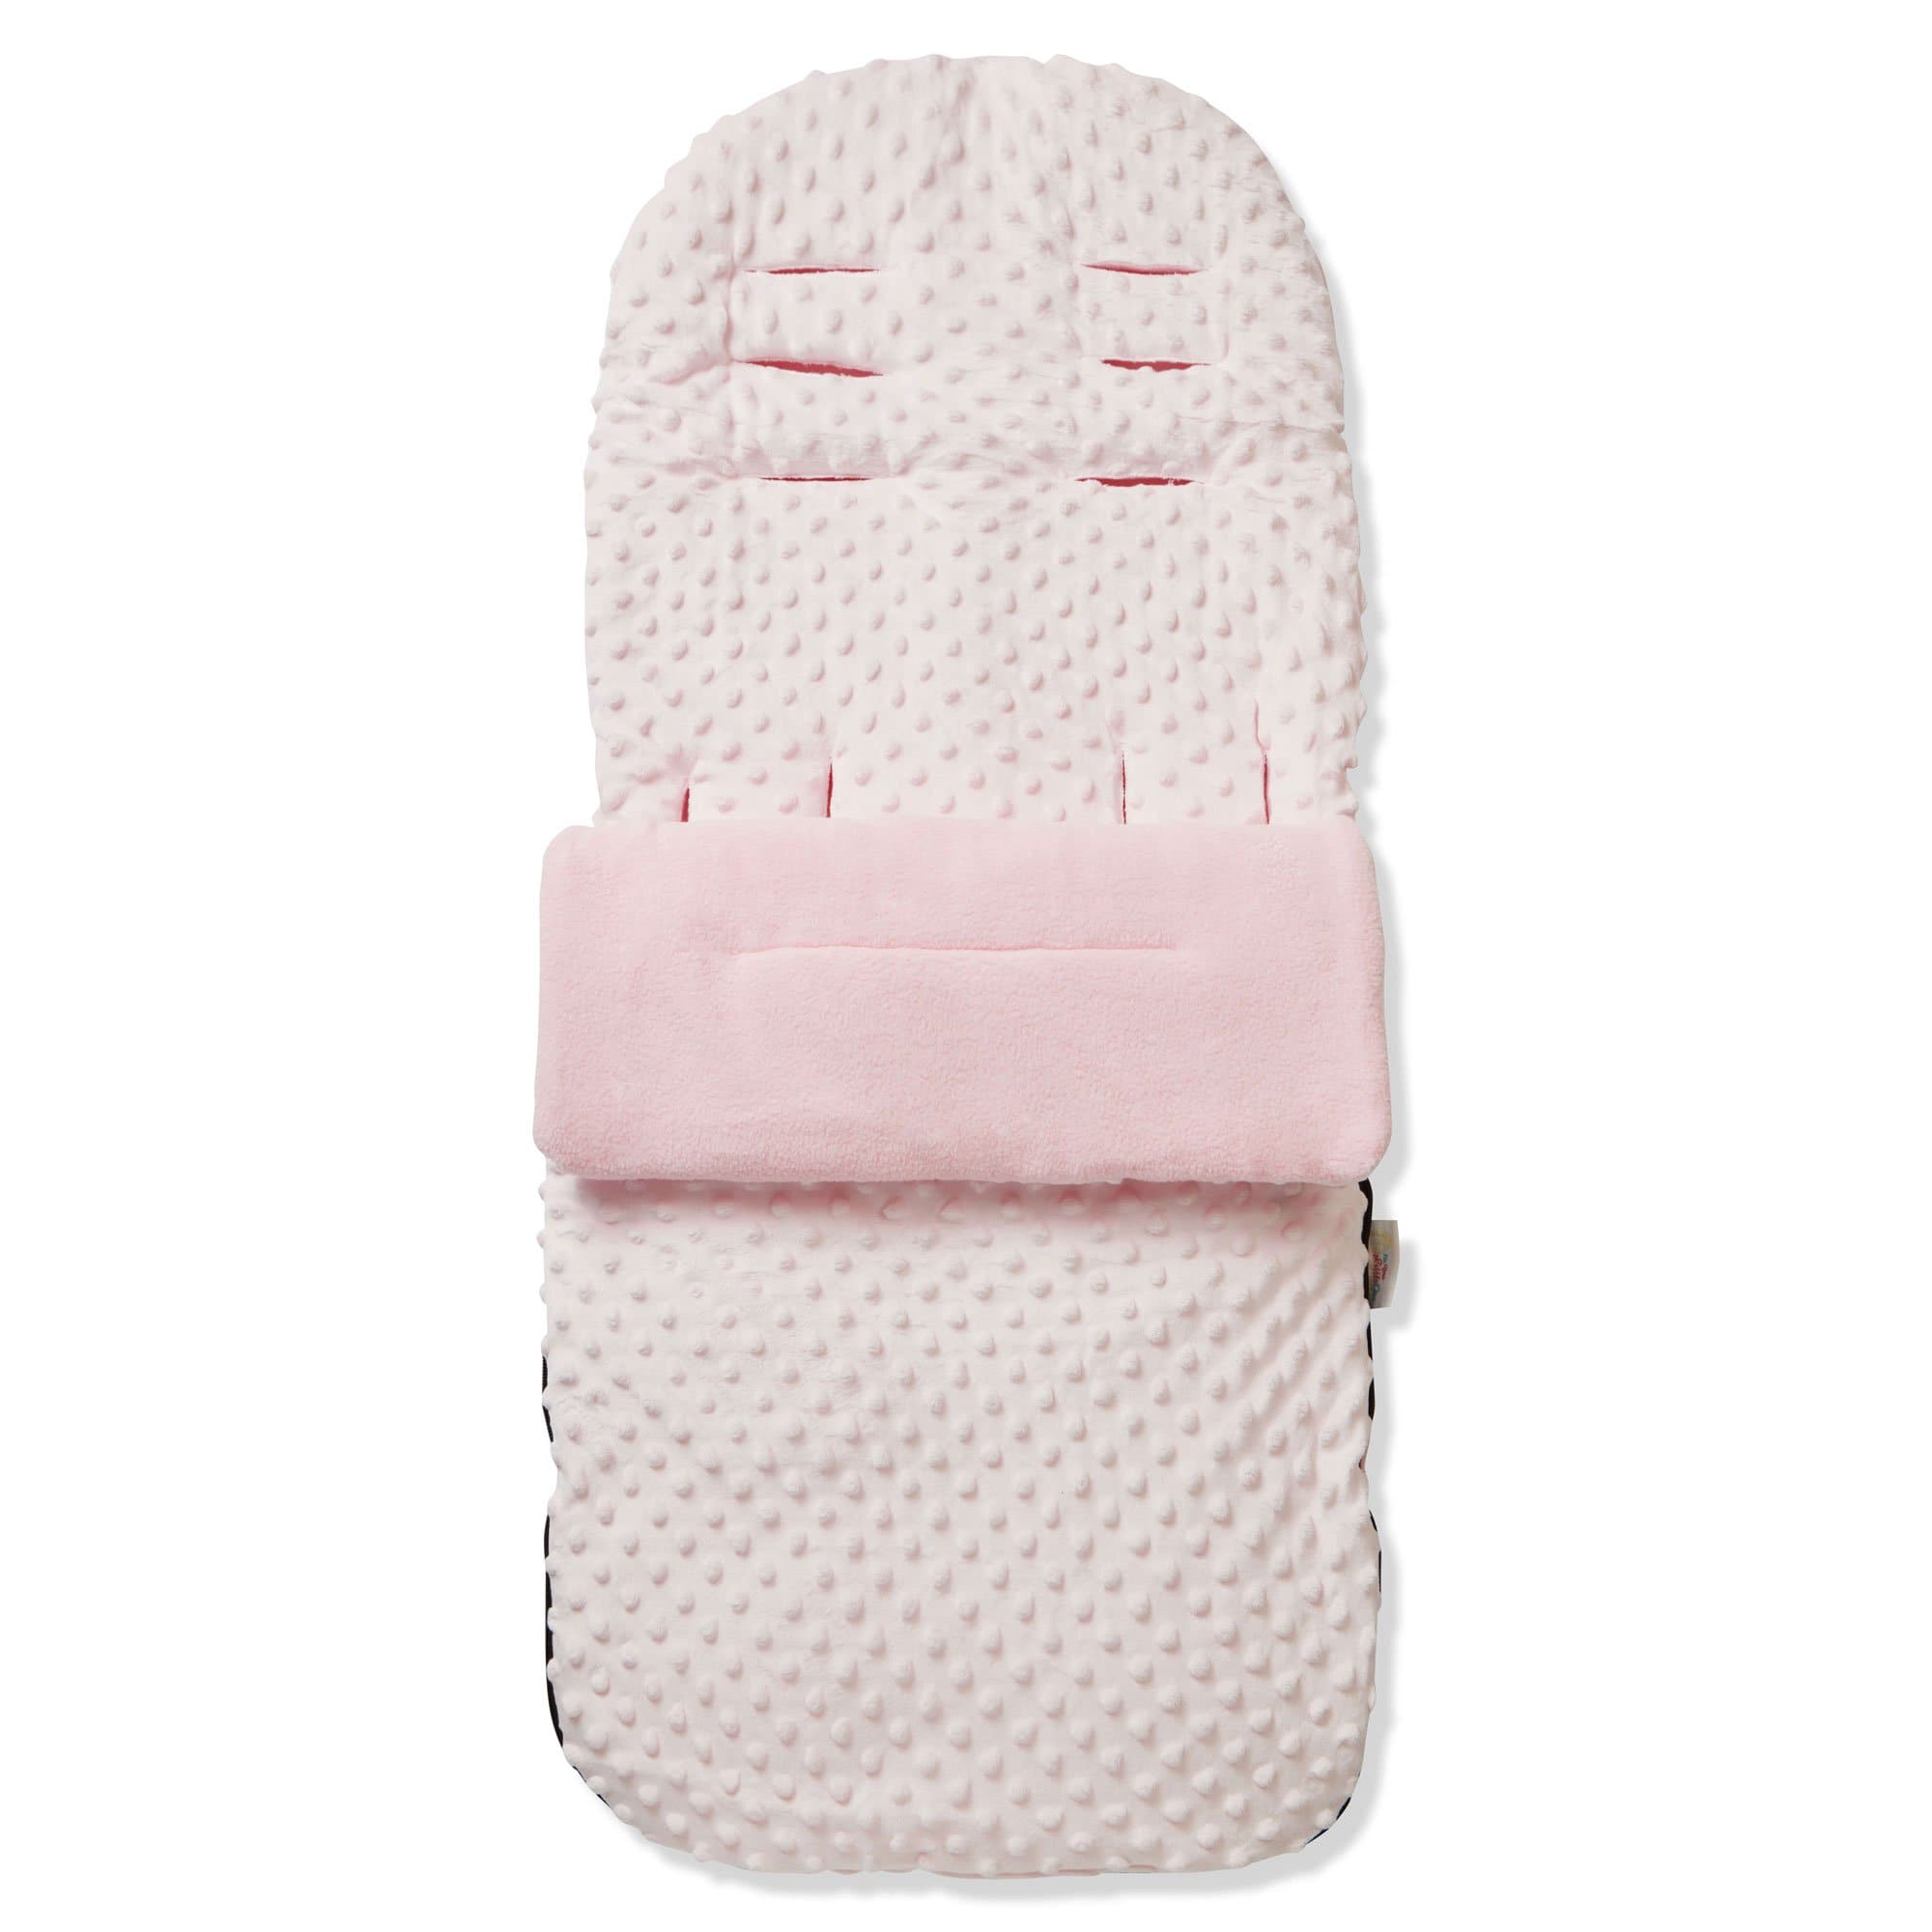 Dimple Footmuff / Cosy Toes Compatible with Mima - For Your Little One